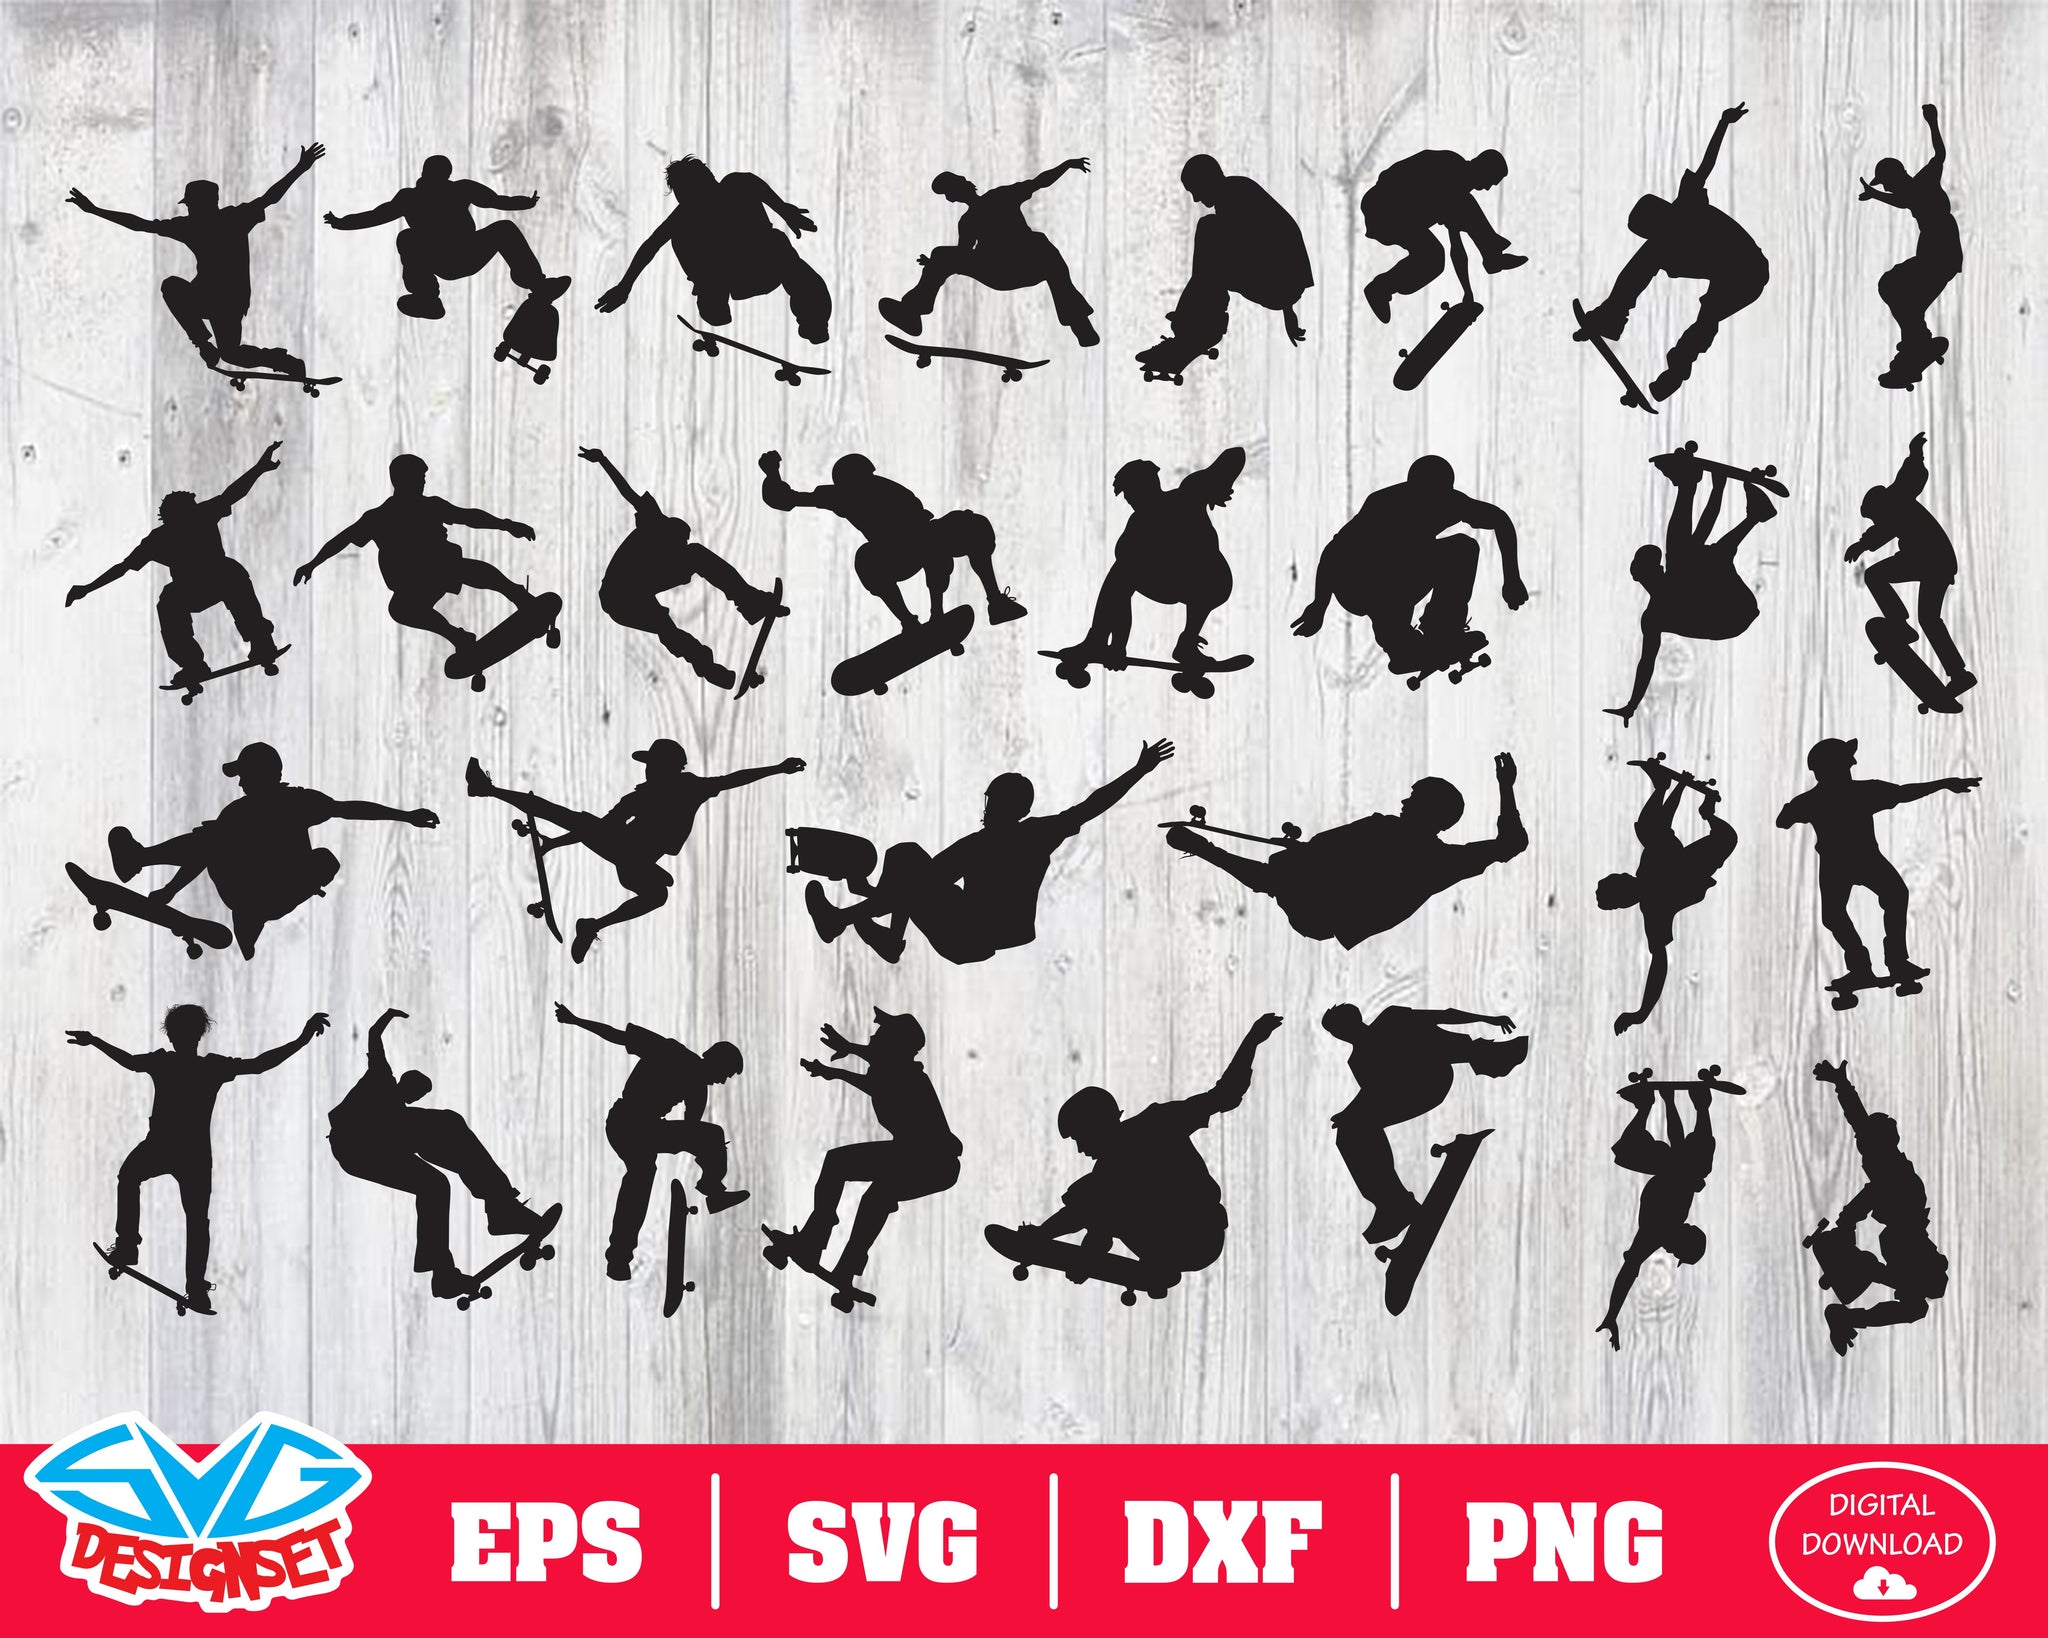 Skateboarder Svg, Dxf, Eps, Png, Clipart, Silhouette and Cutfiles - SVGDesignSets